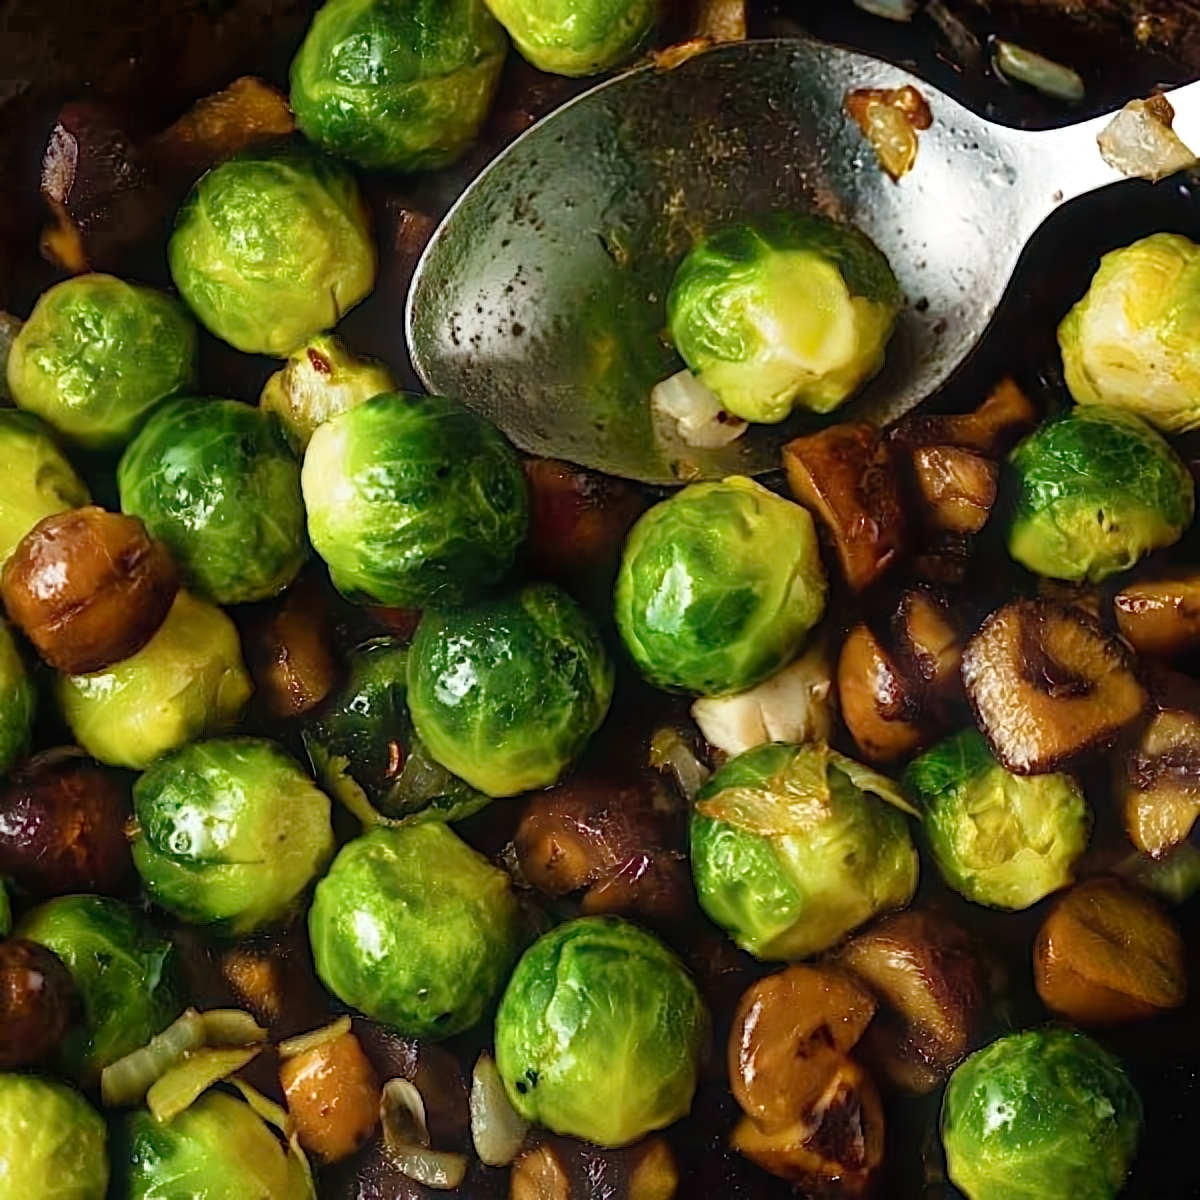 28. Brussels Sprouts and Chestnuts